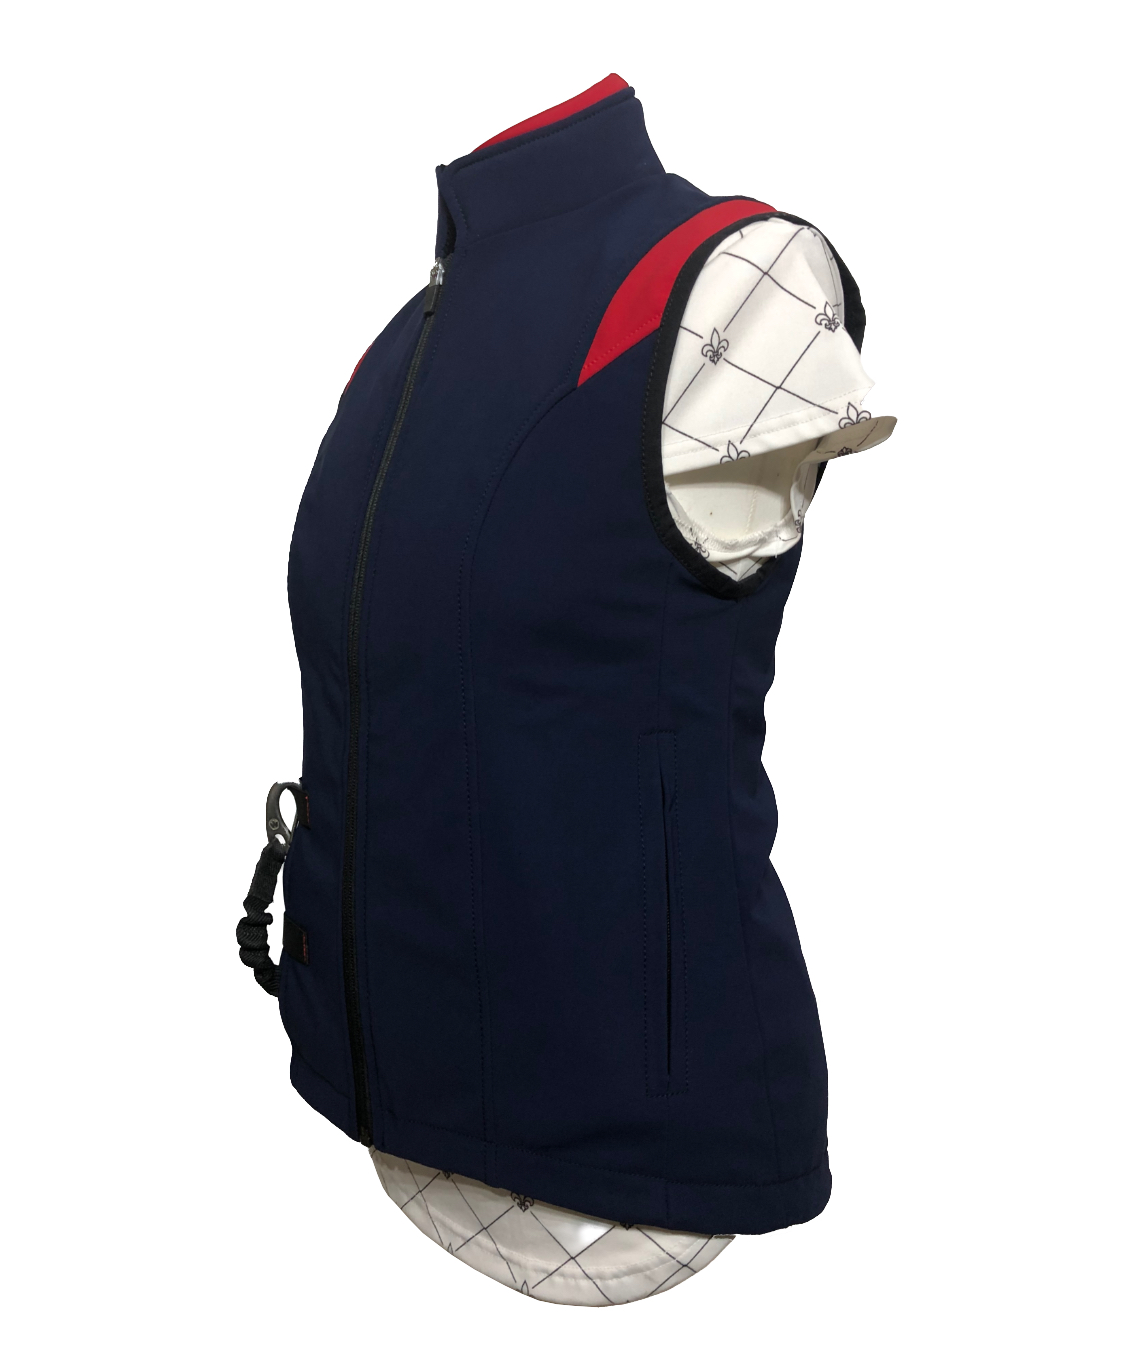 Refurbished Zip In 1 With Airshell vest outer in blue and red small side